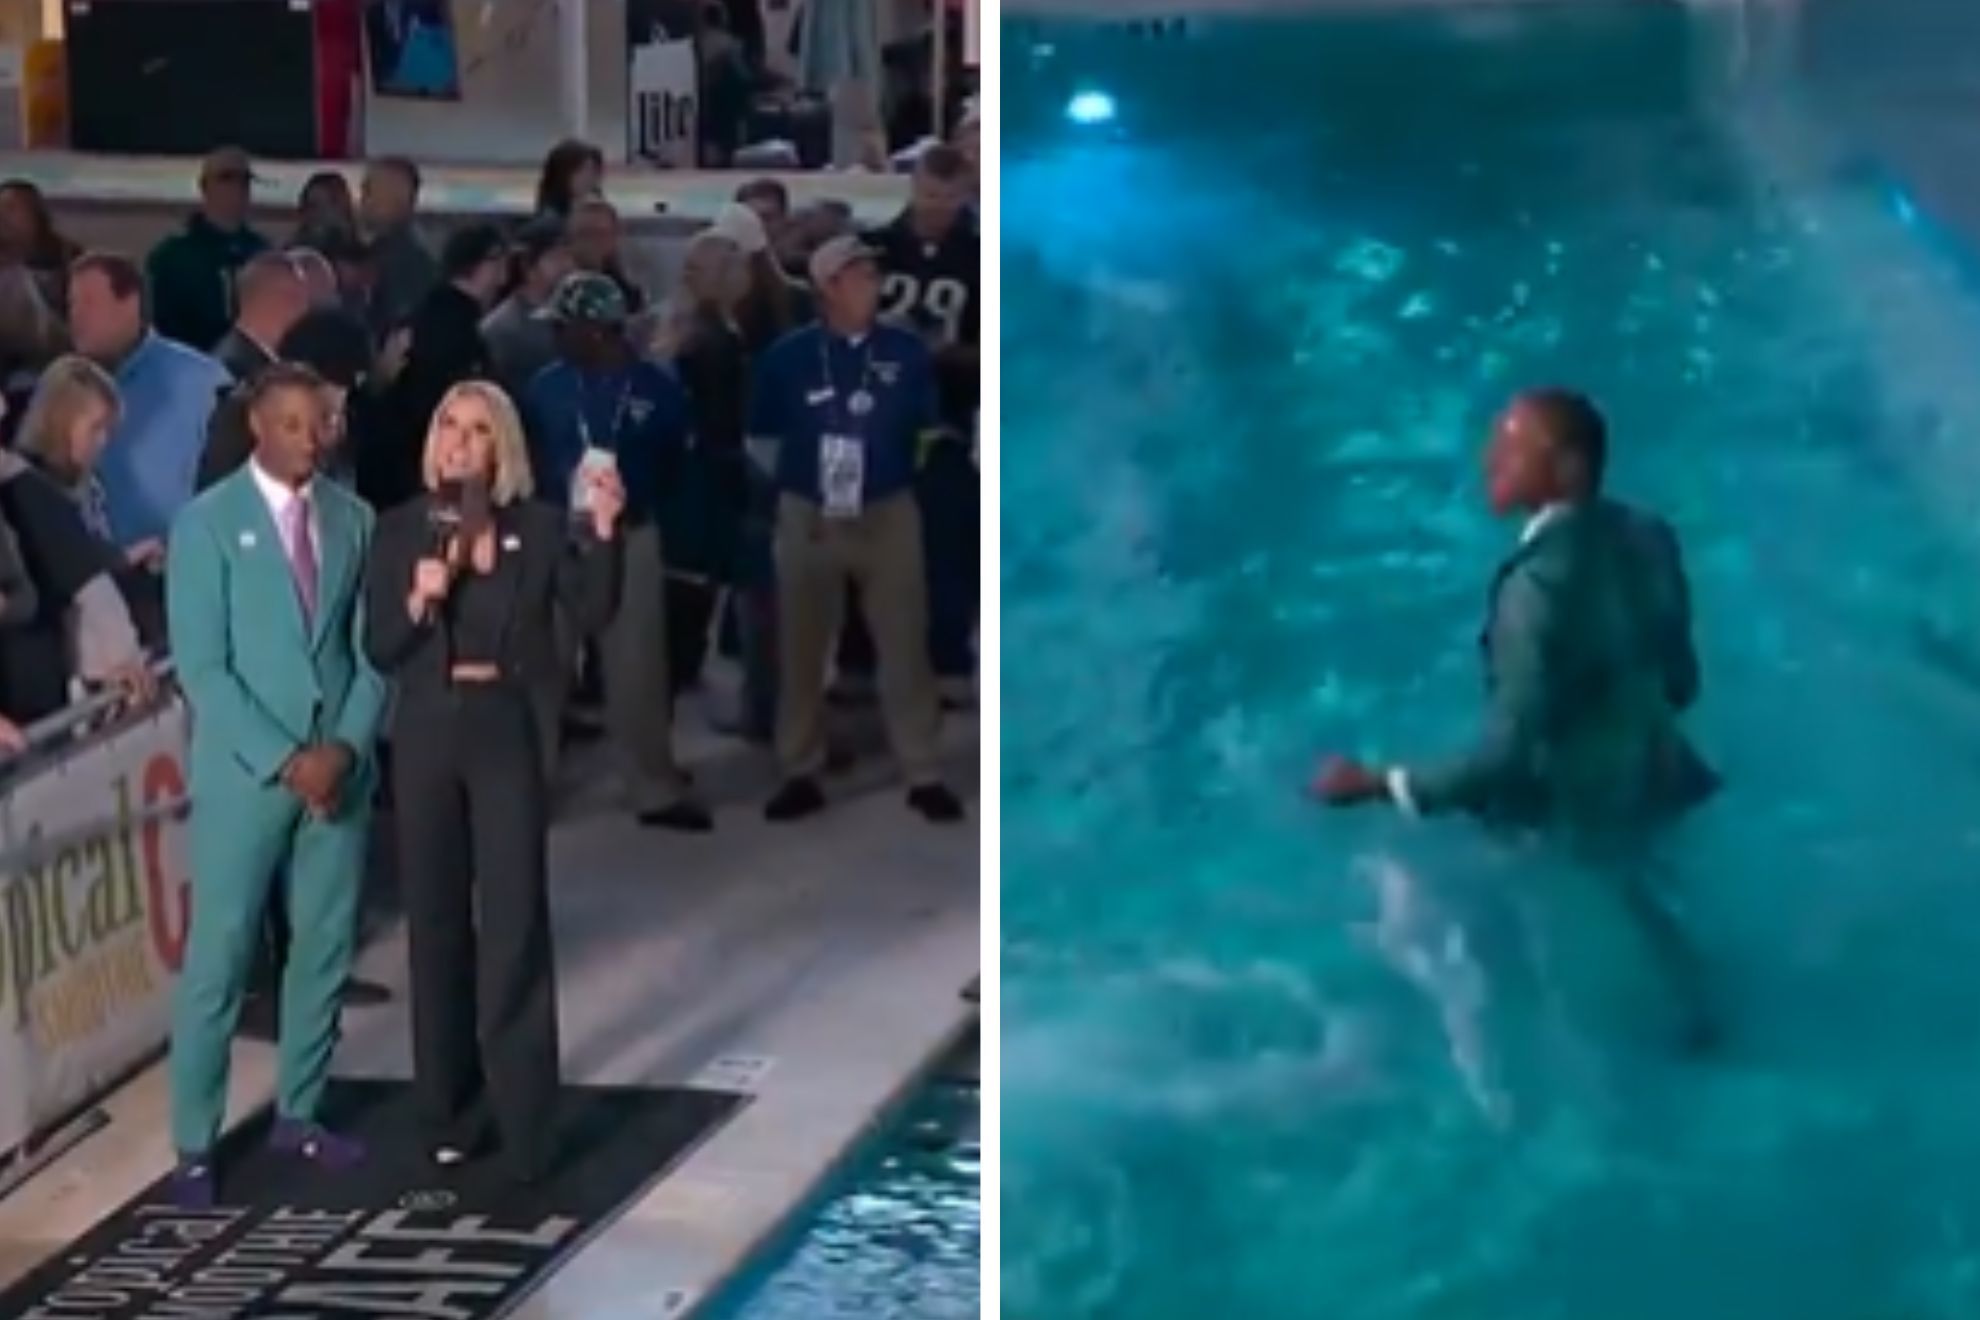 Robert Griffin III makes a splash on live TV after jumping in Jaguars pool fully dressed